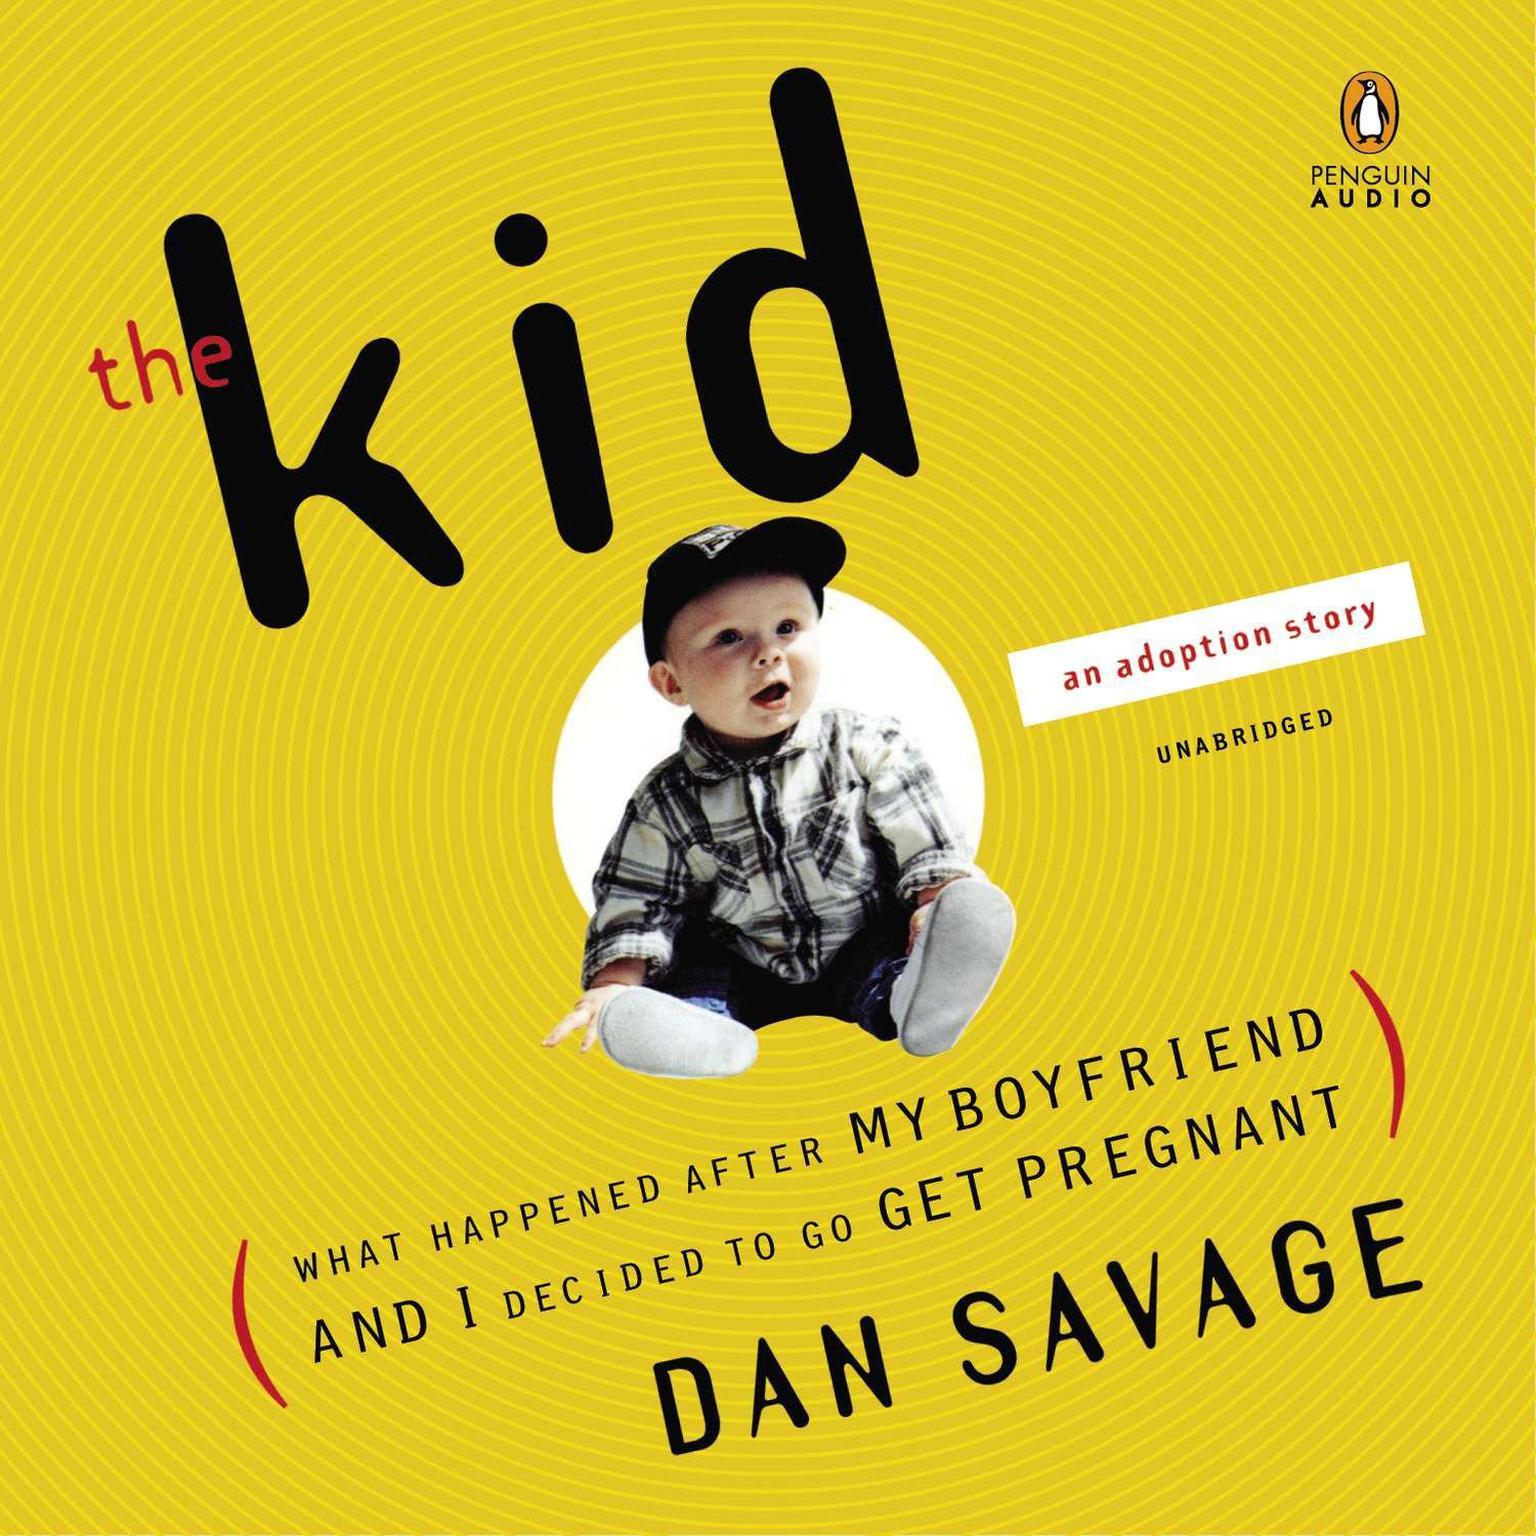 The Kid: What Happened After My Boyfriend and I Decided to Go Get Pregnant Audiobook, by Dan Savage